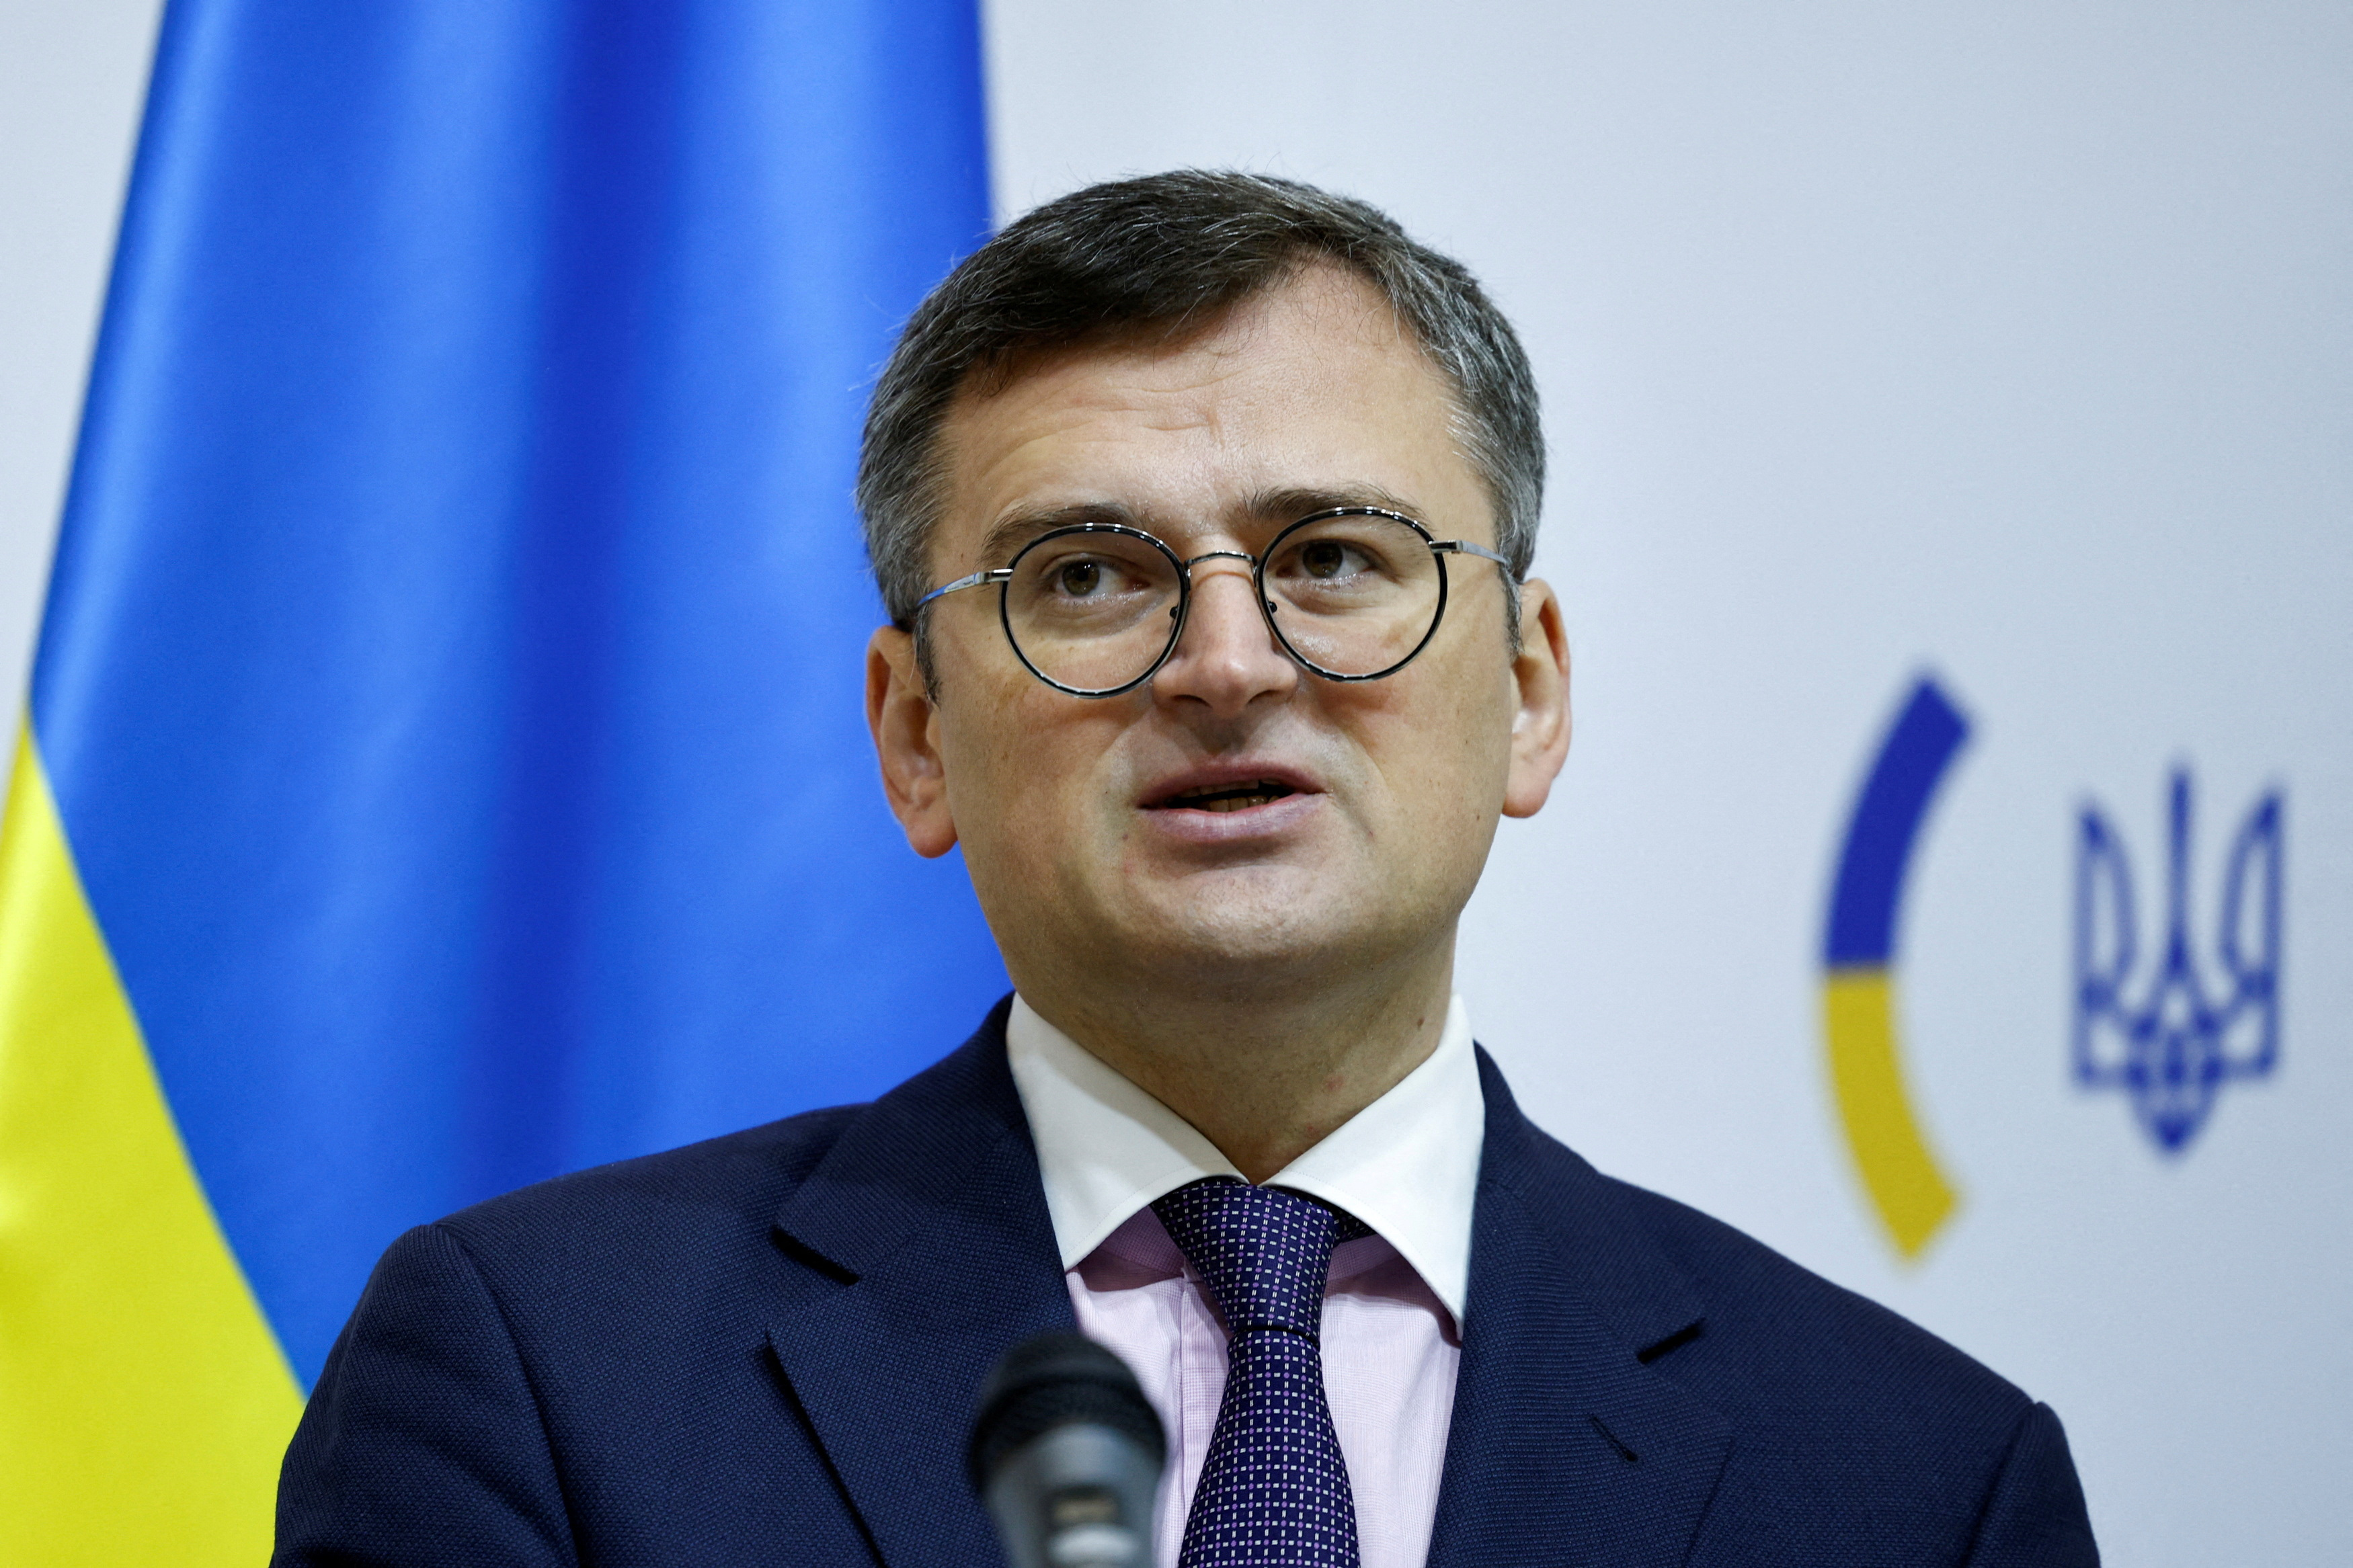 Ukrainian Foreign Minister Kuleba attends a news conference in Kyiv